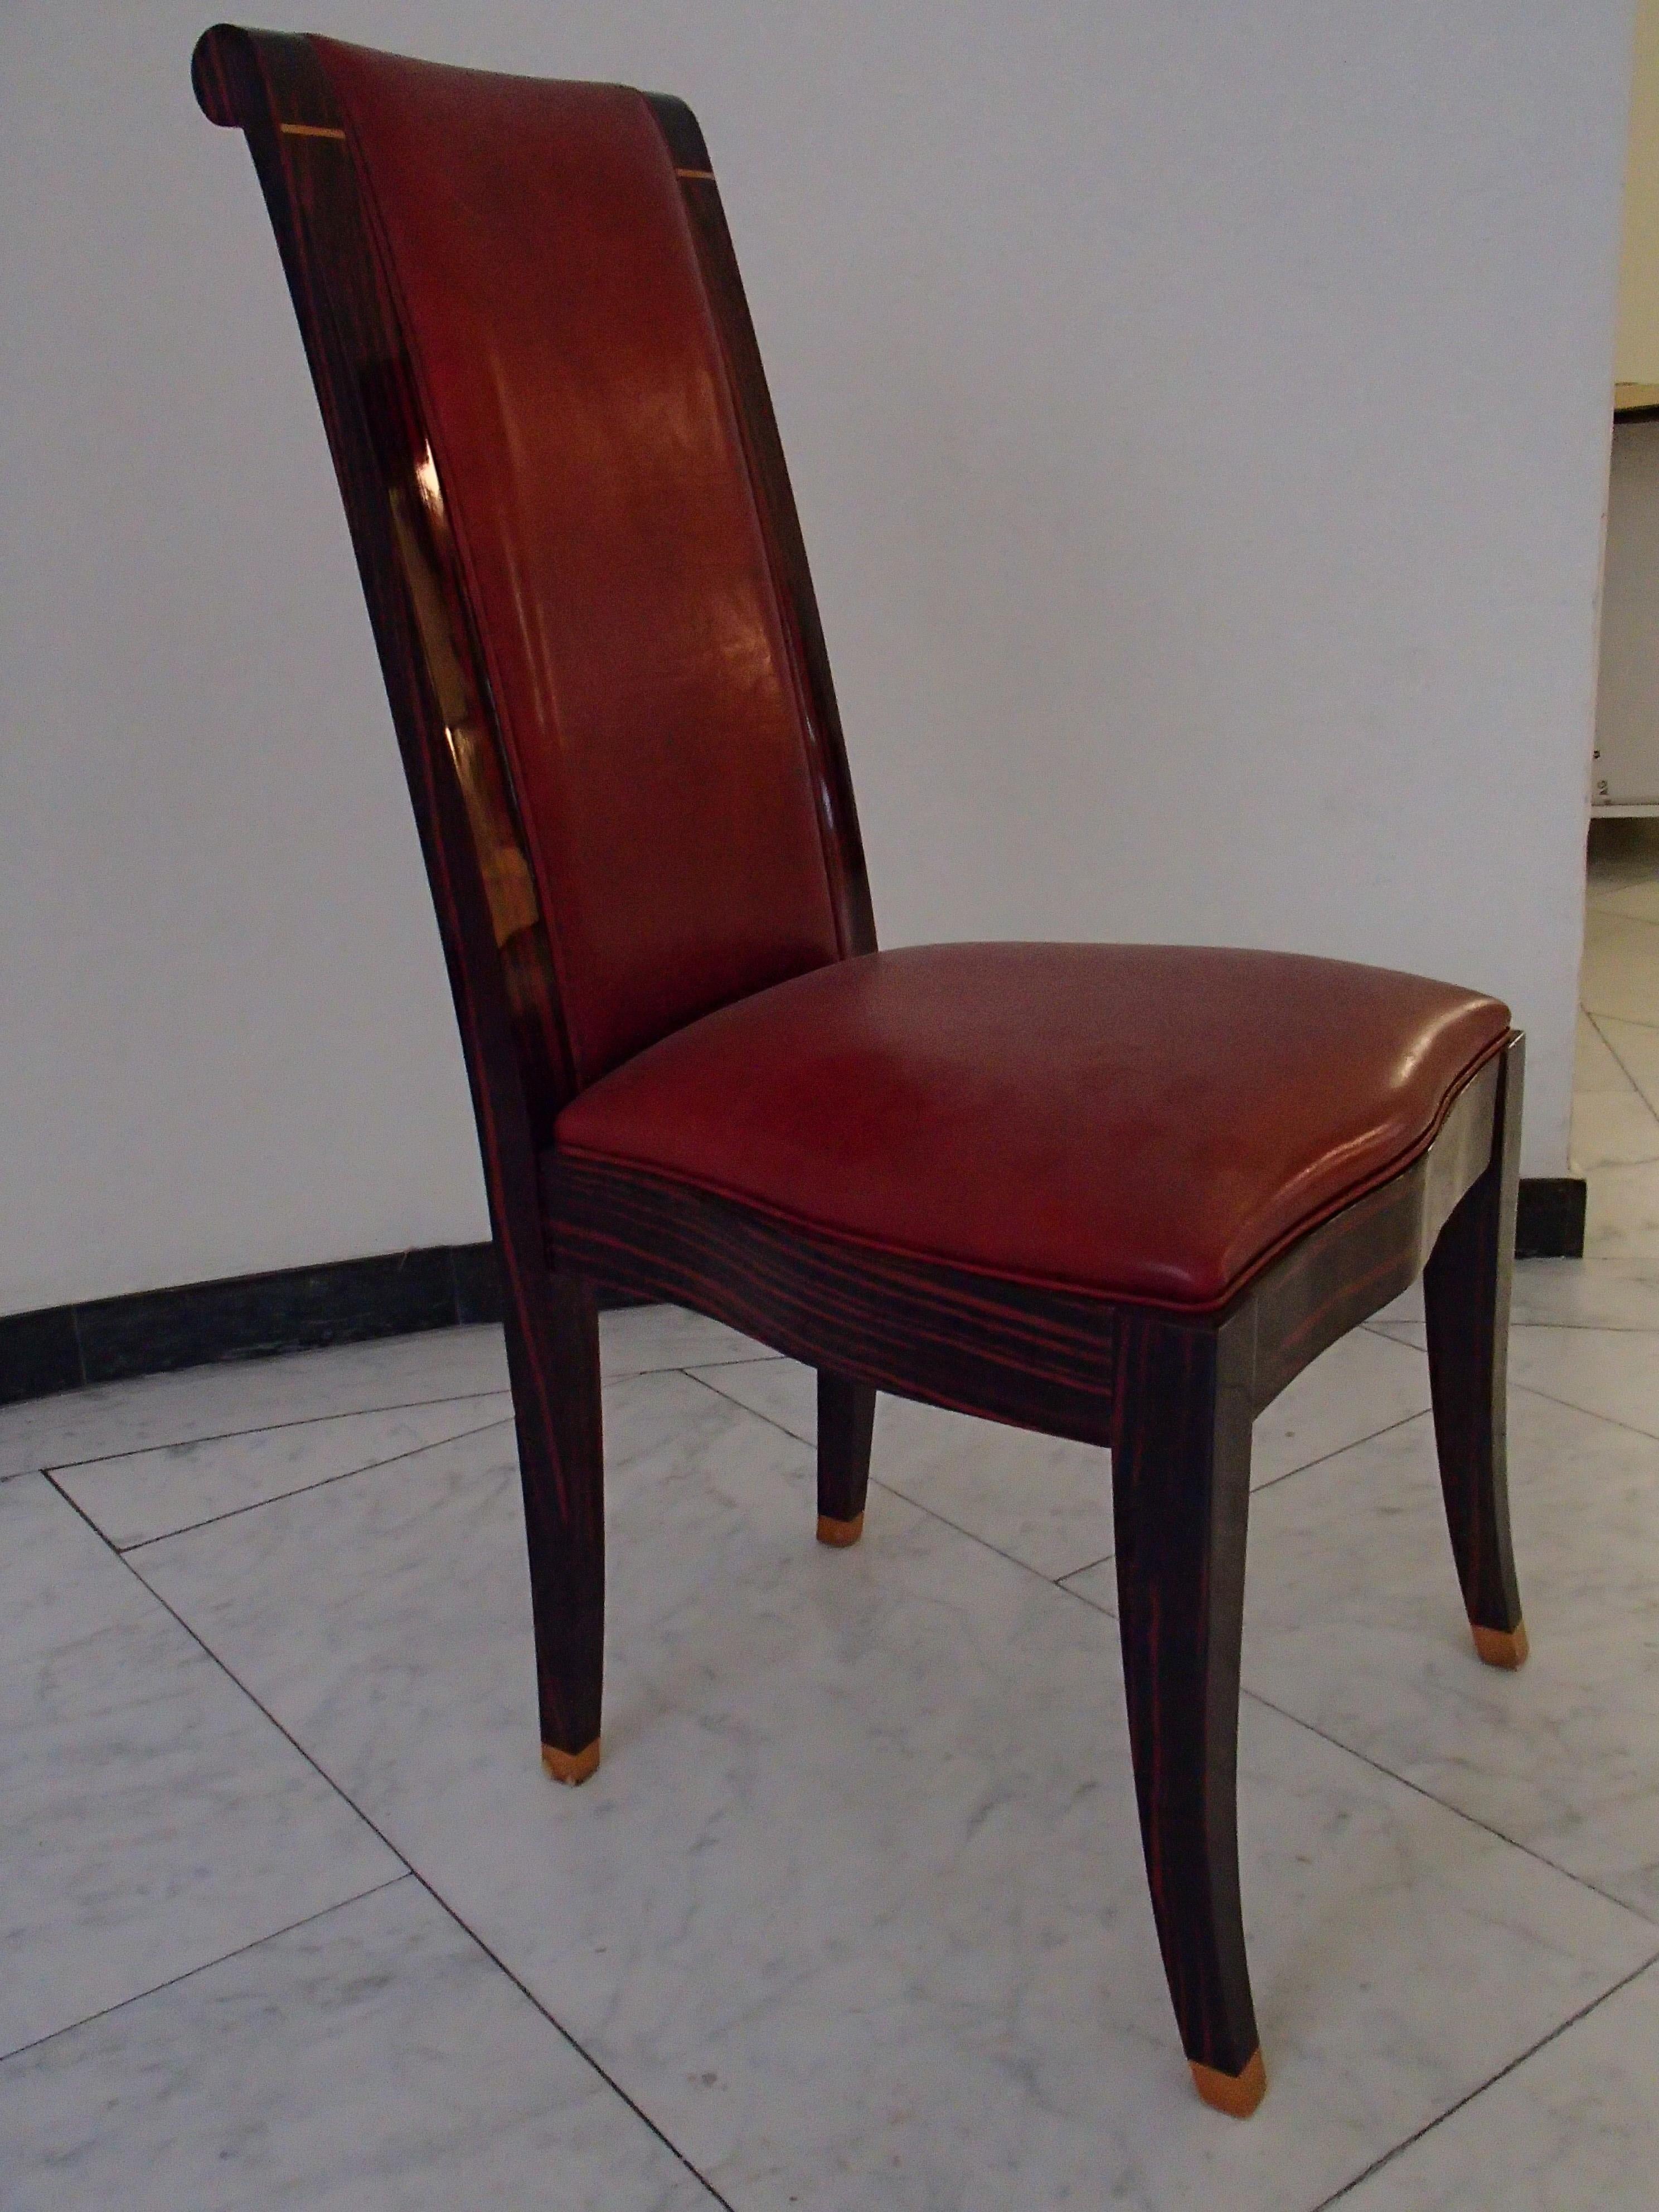 Round Art Deco Table with 4 Red Leather Chairs In Fair Condition For Sale In Weiningen, CH